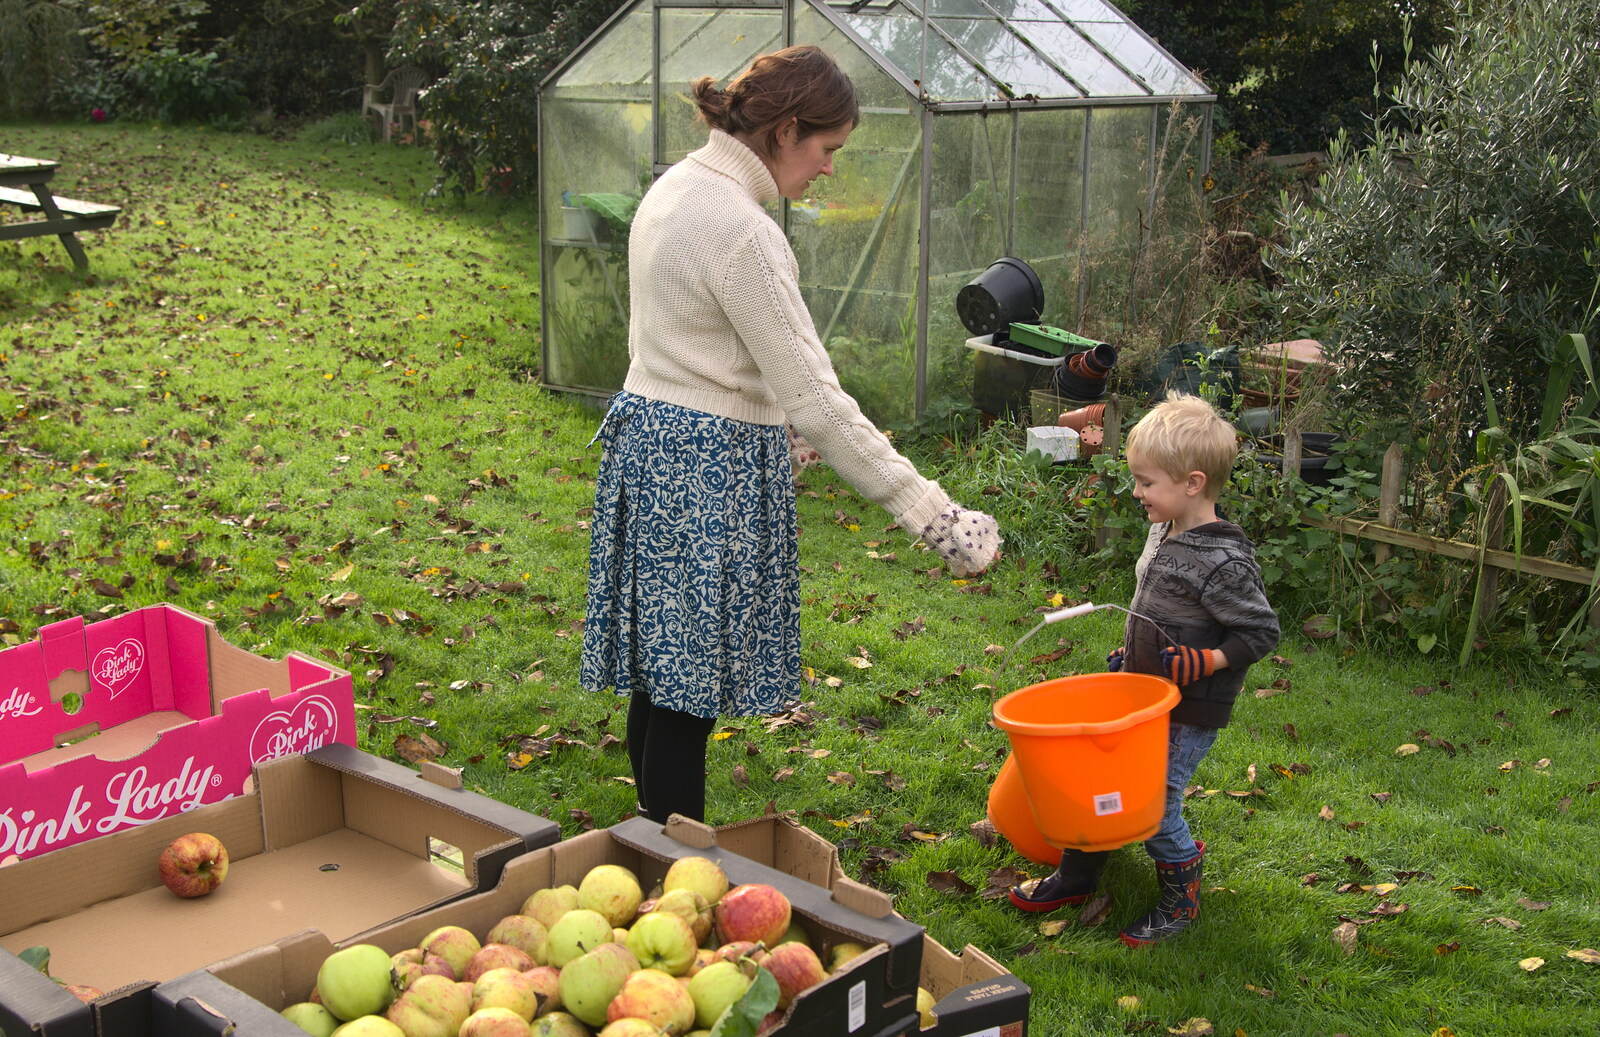 Harry helps with buckets from Apple Picking and The BBs at Framingham Earl, Norfolk - 25th October 2015